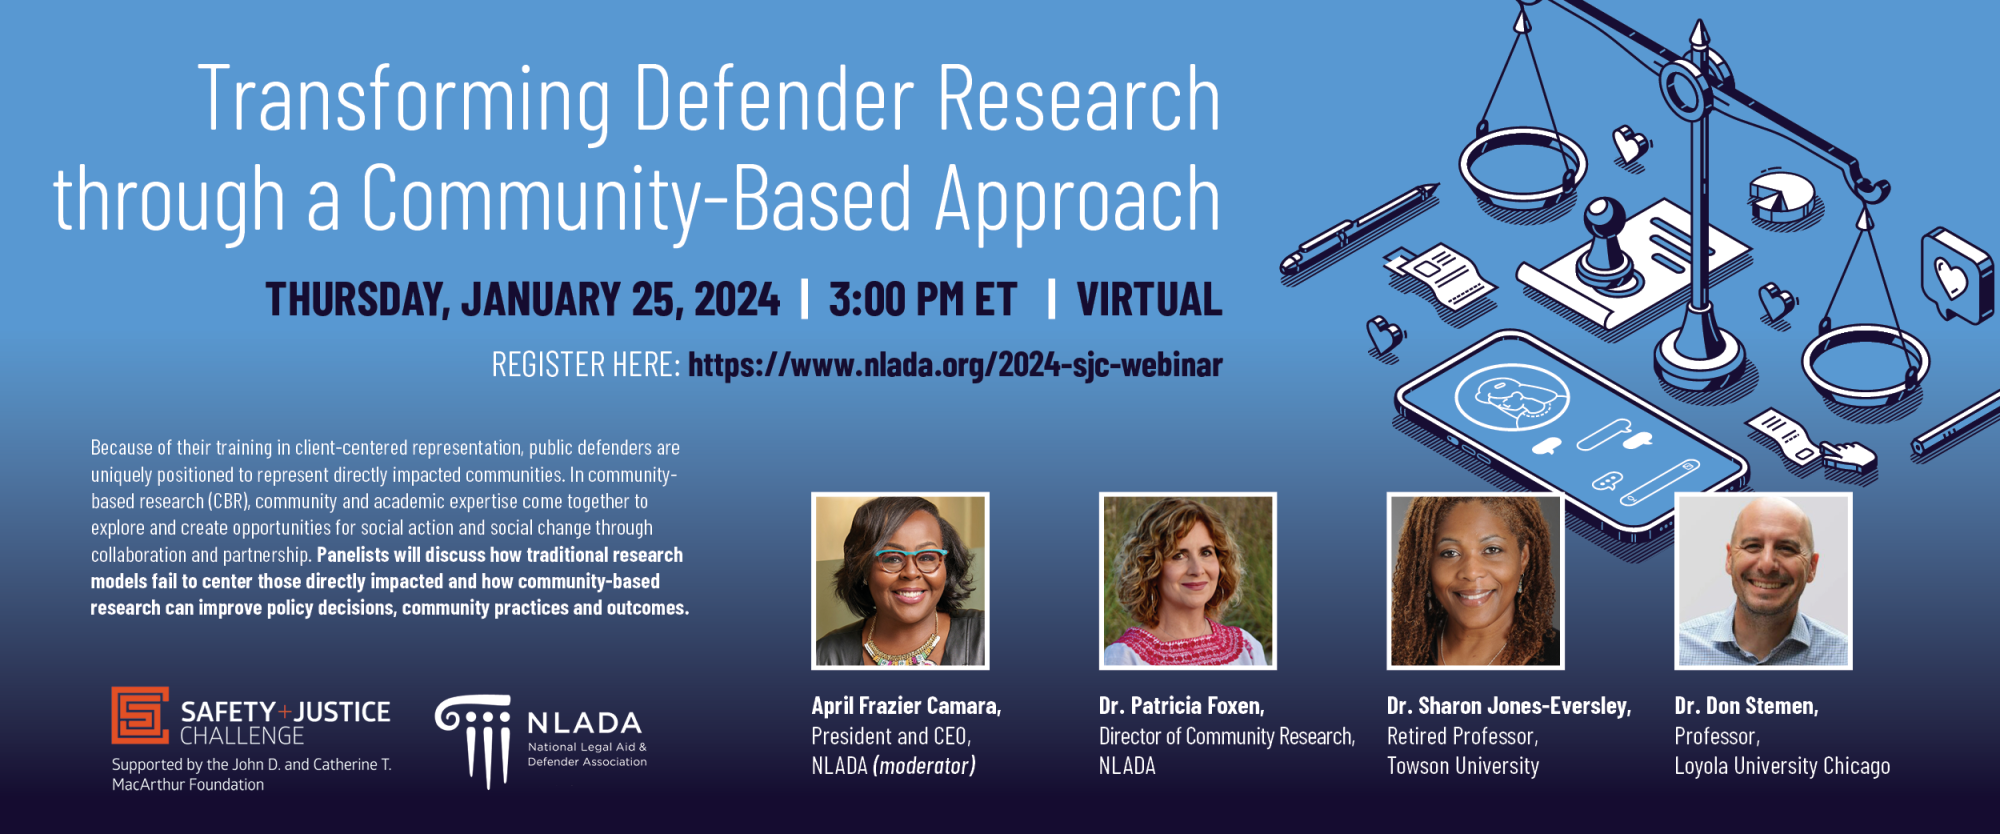 Transforming Defender Research Through a Community-Based Approach program banner